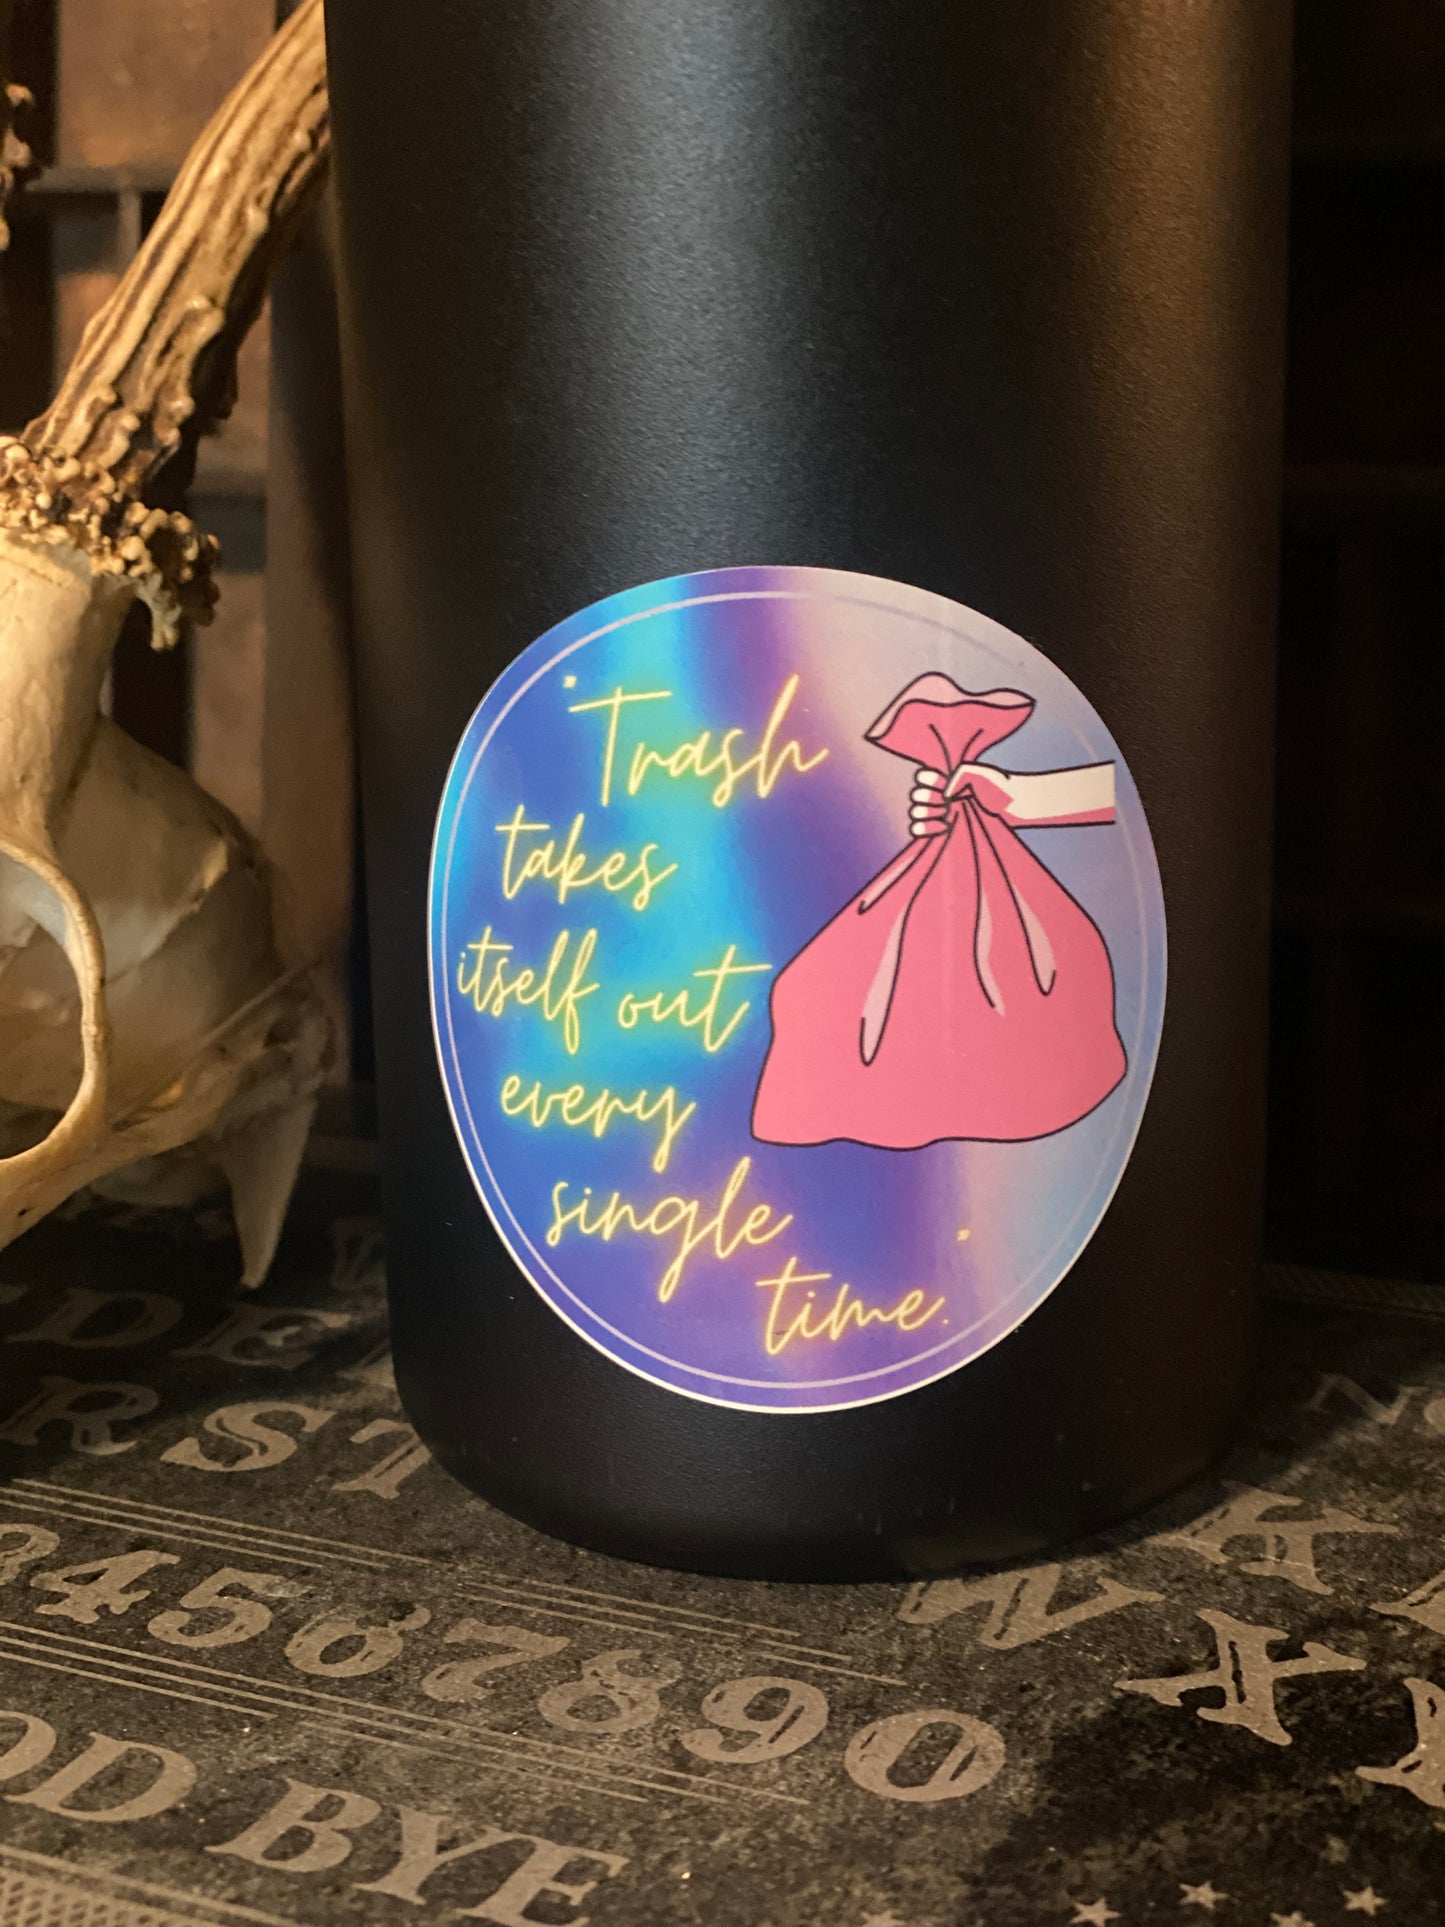 Taylor Swift “Trash takes itself out every single time.” Gloss sticker 3”